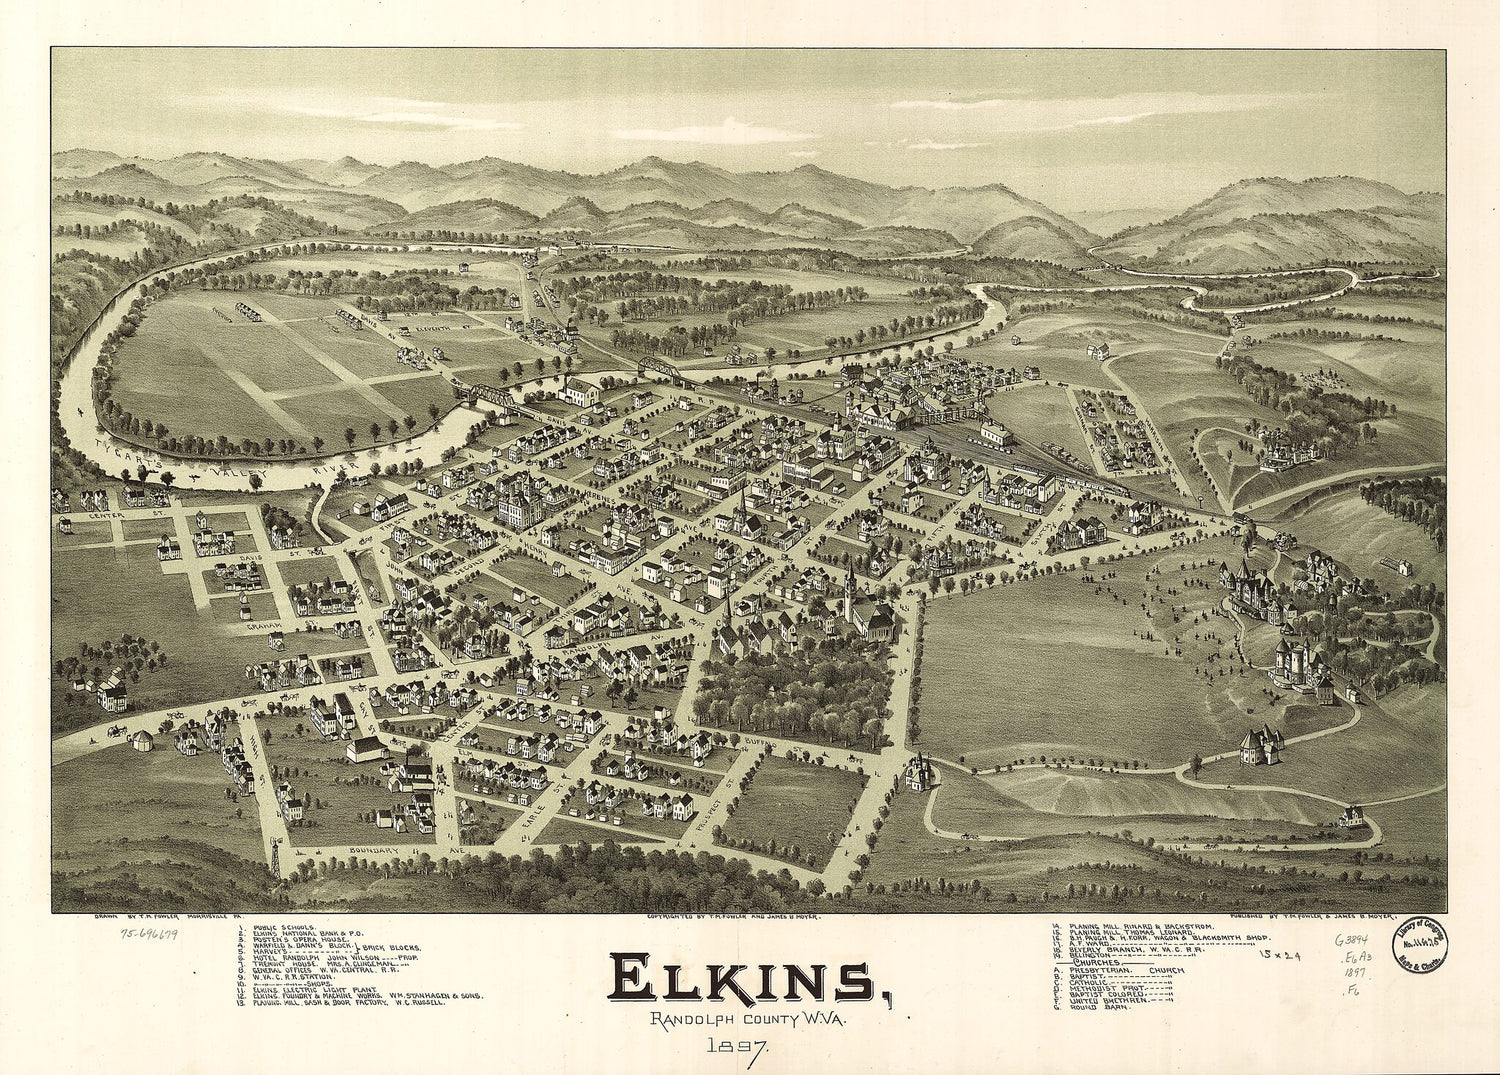 This old map of Elkins, Randolph County, W.Va. from 1897 was created by T. M. (Thaddeus Mortimer) Fowler, James B. Moyer in 1897